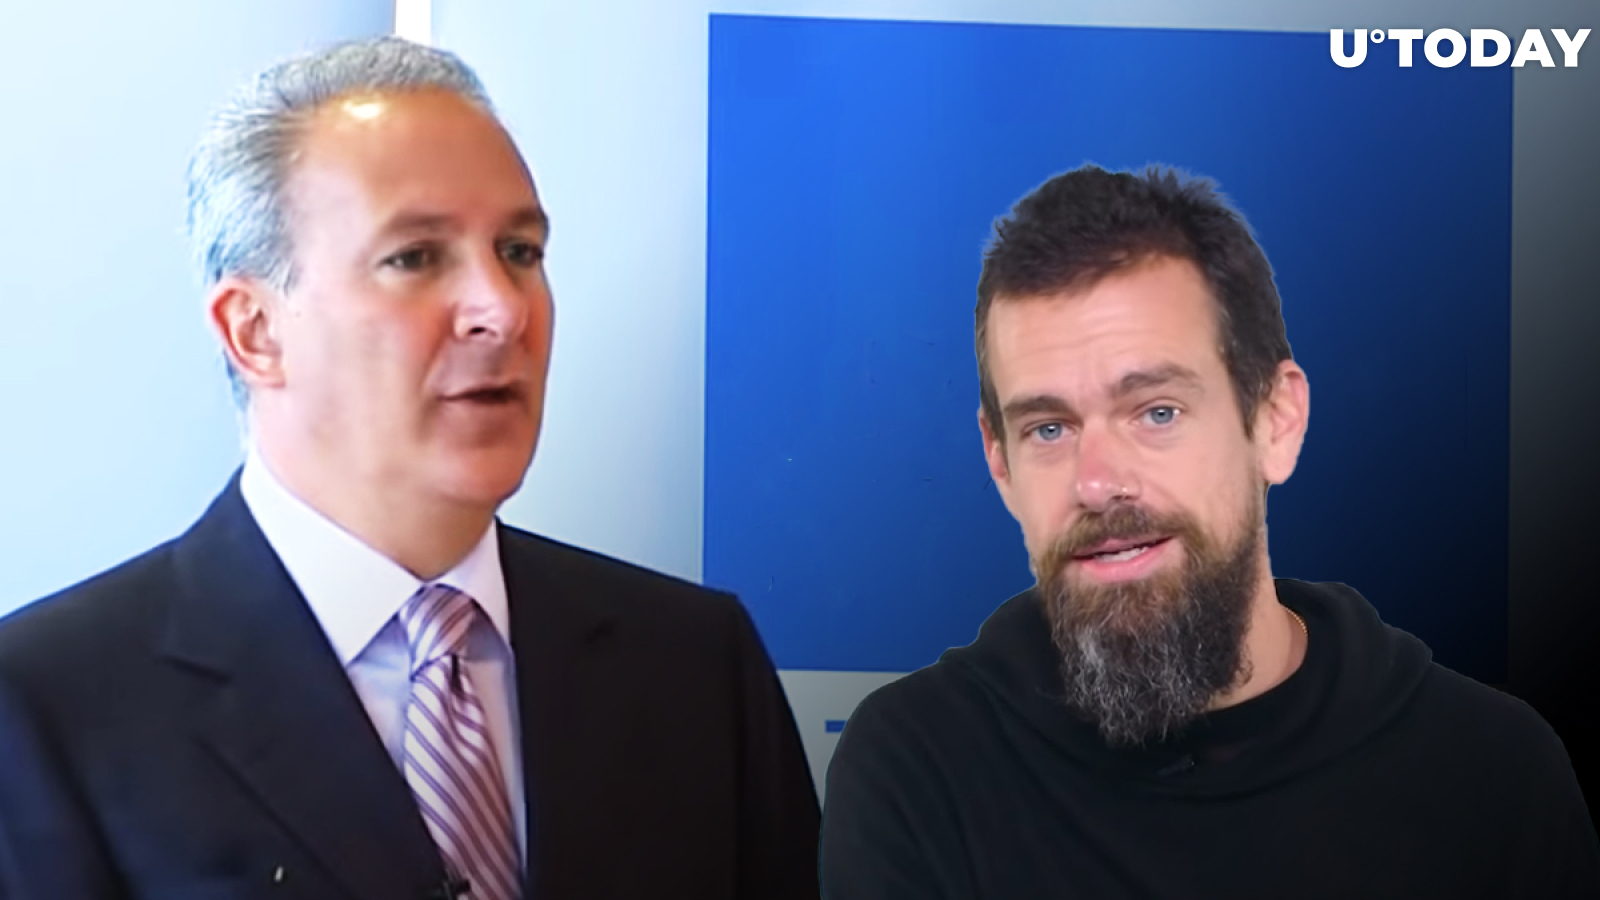 Peter Schiff Responds to Jack Dorsey About Bitcoin’s Role in Hyperinflation